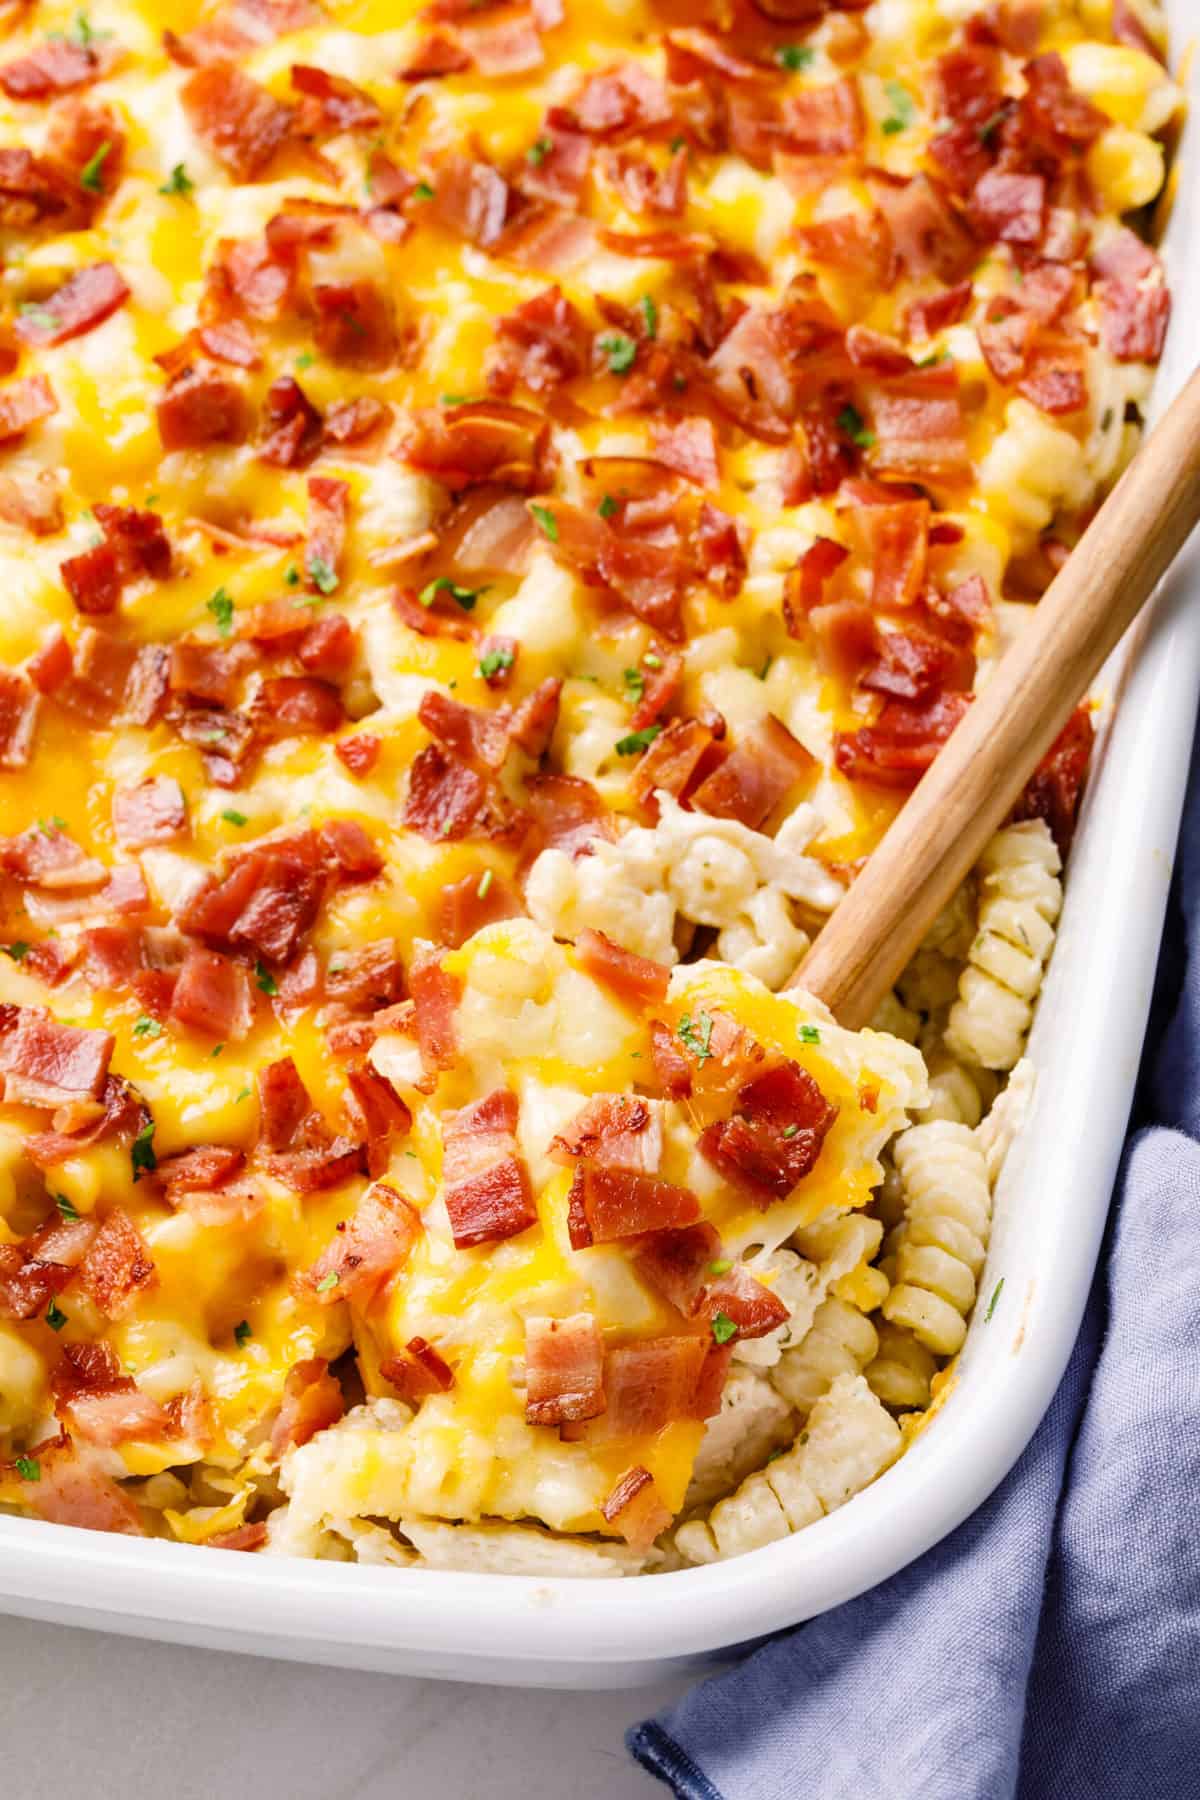 Chicken Bacon Ranch Casserole in a baking dish with a wooden spoon